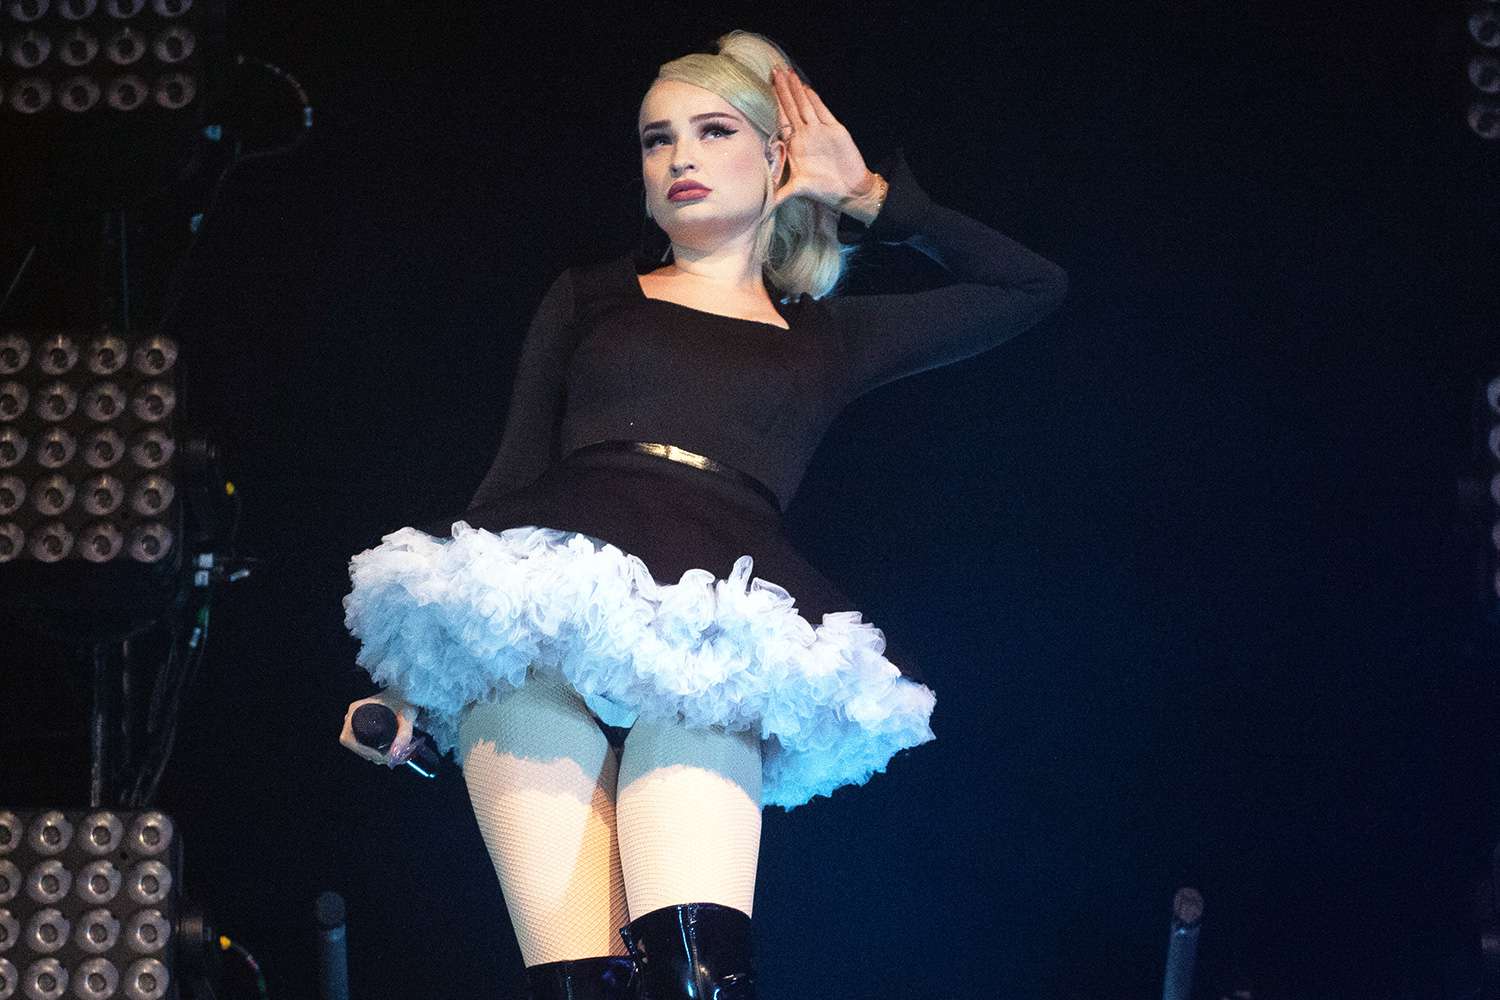 Kim Petras performs at Shepherd's Bush Empire, London, England, UK on Tuesday 11 February 2020 as part of her 'Clarity' Tour.